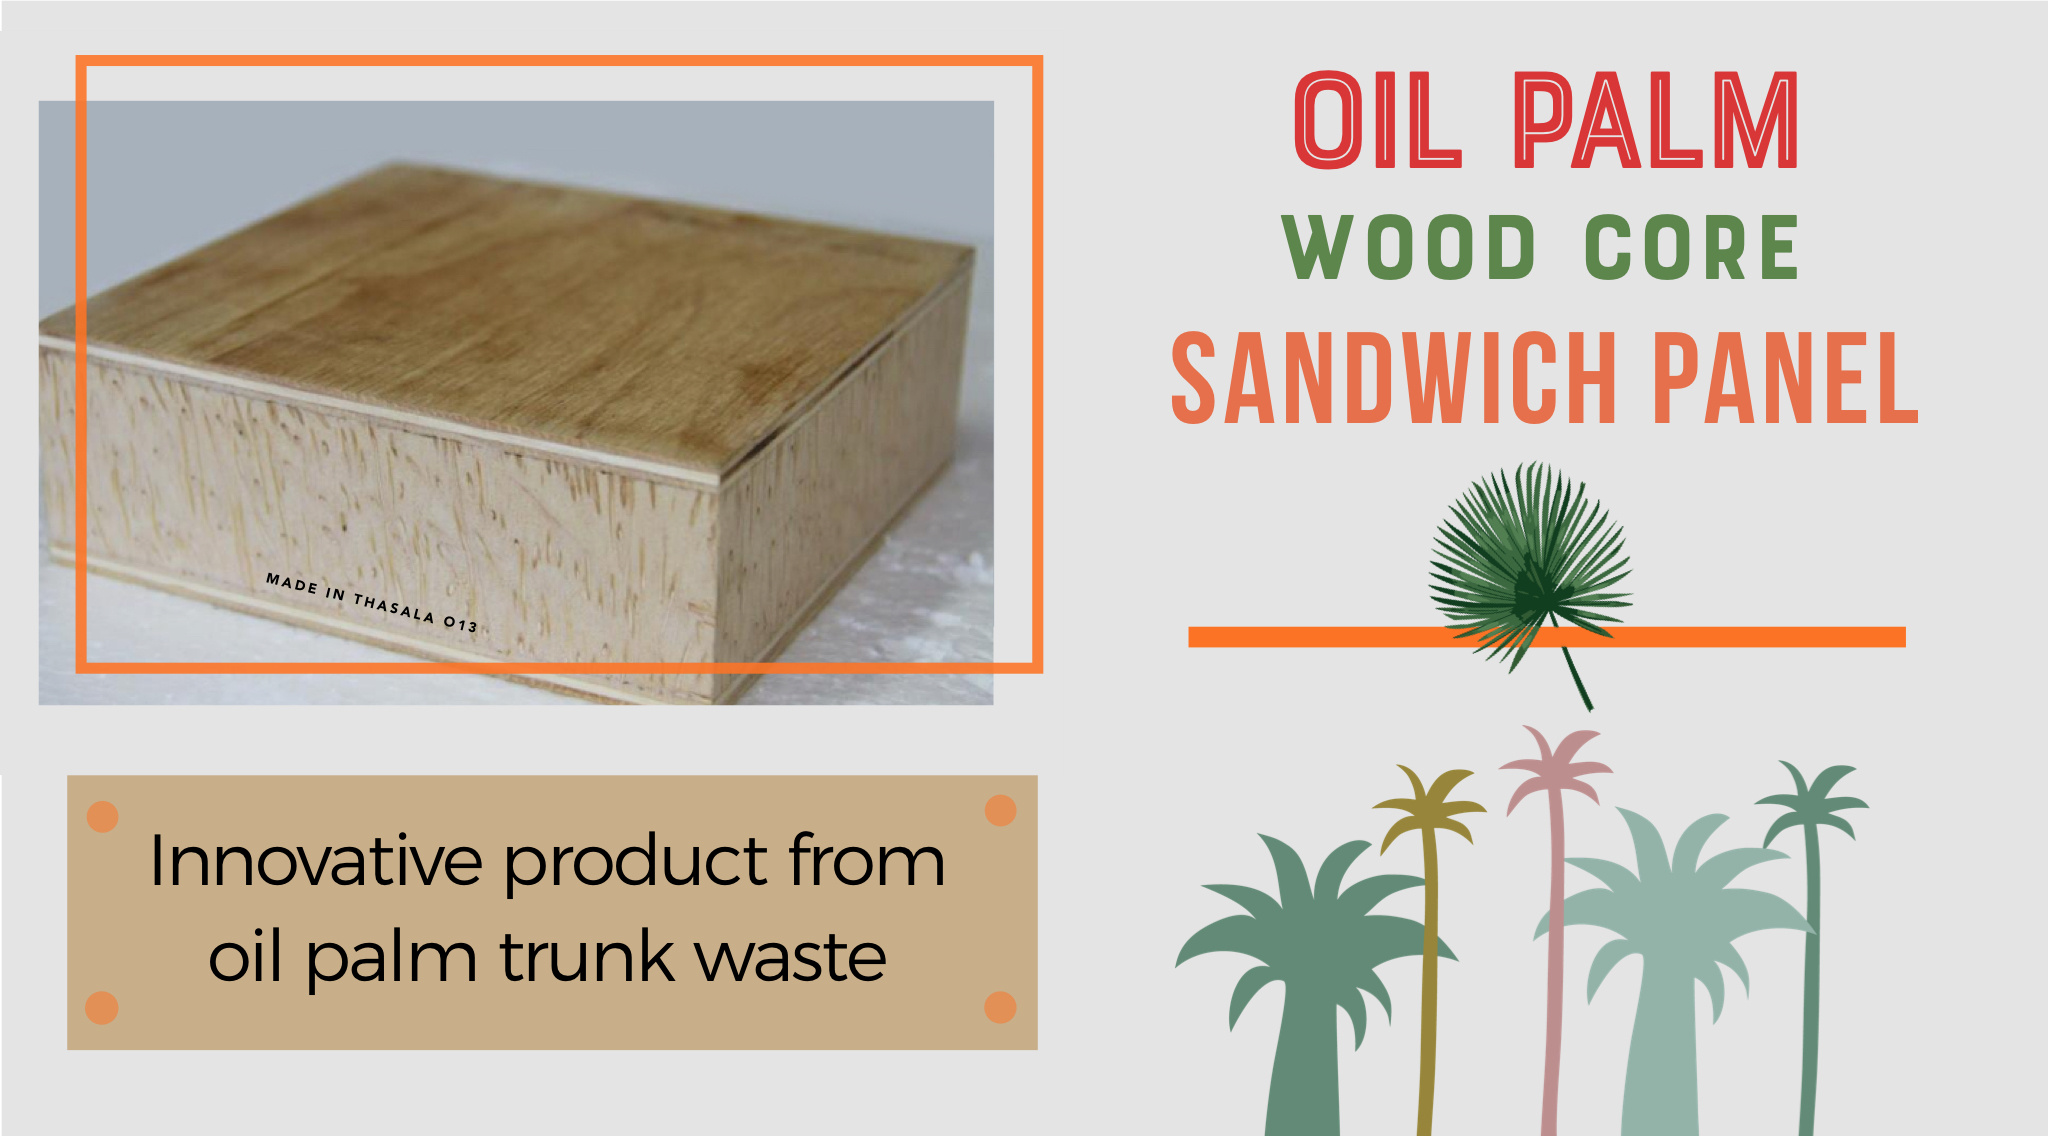 Oil Palm Wood Core Sandwich Panel – Innovative Product from Oil Palm Trunk Waste